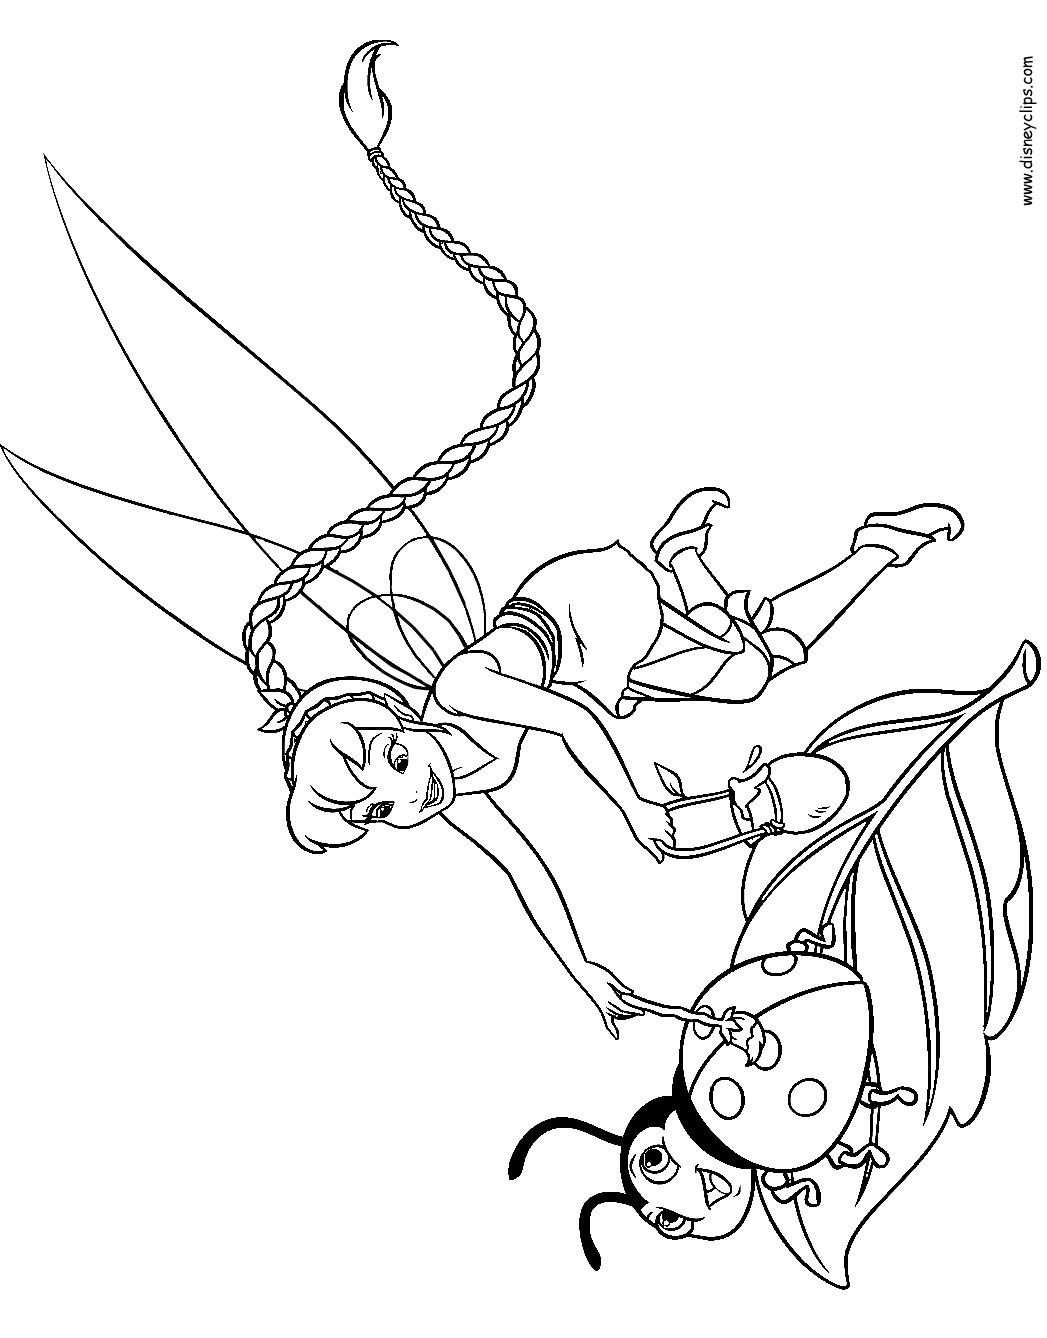 disney fairy pictures to color disney fairies coloring pages 2 disneyclipscom to disney fairy color pictures 